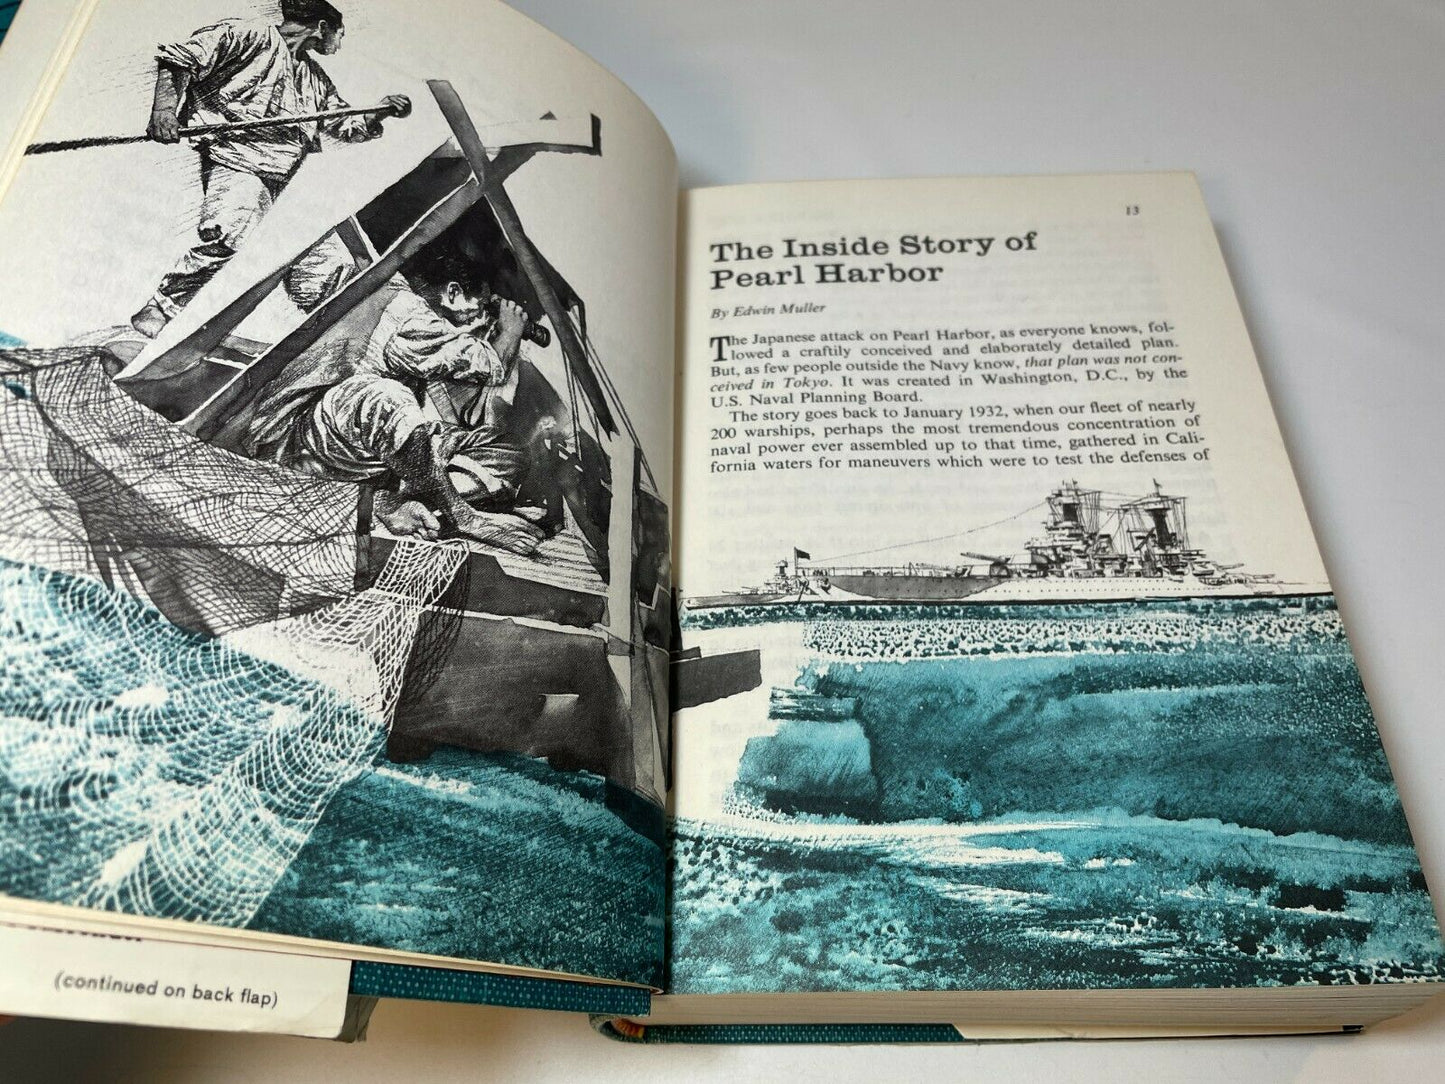 Secrets And Spies Behind the Scenes Stories of WWII, 1964, Readers Digest (B3)